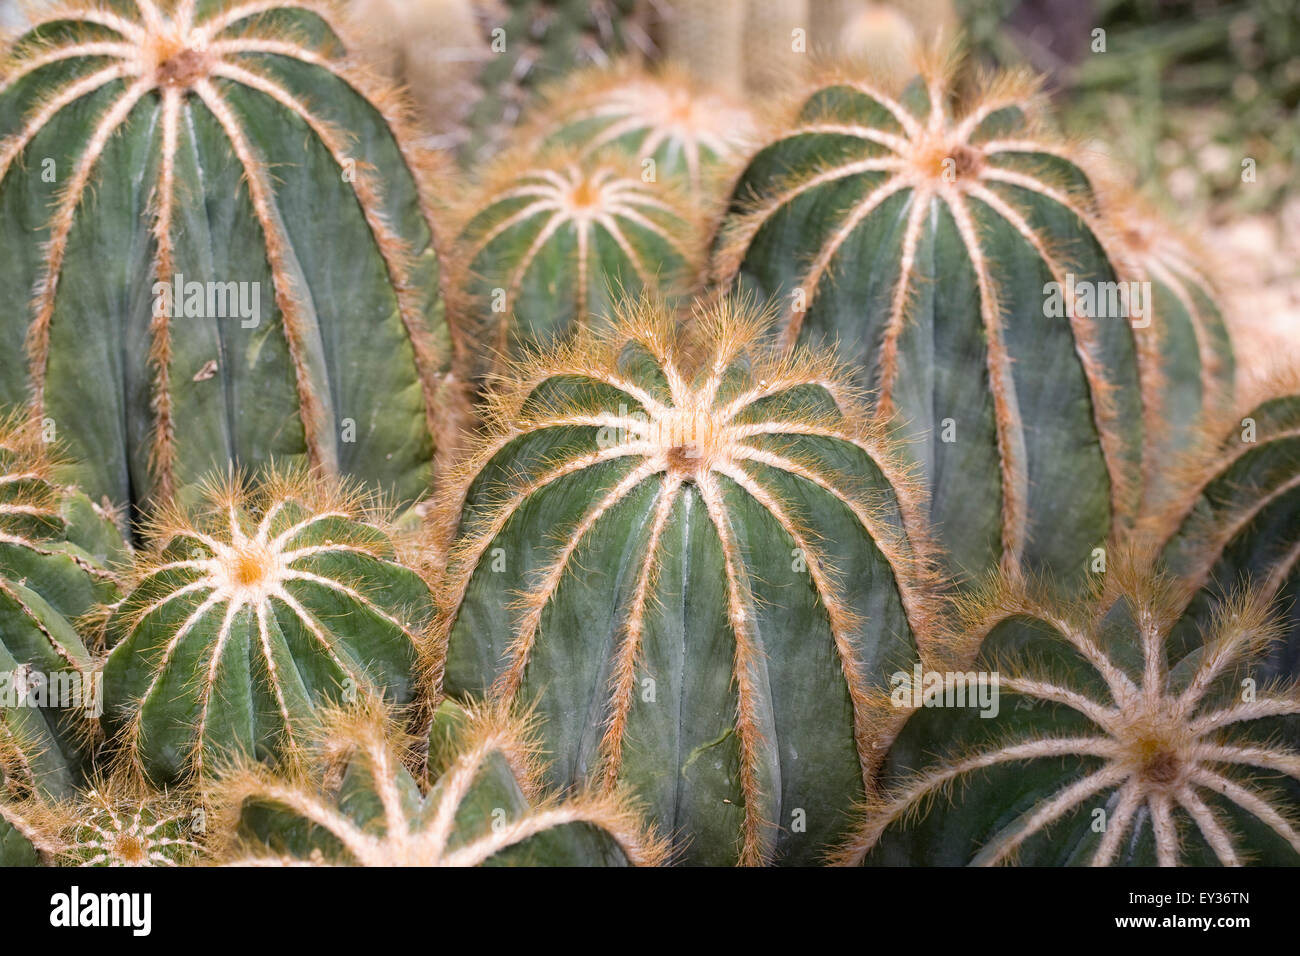 Parodia magnifica. Ball cactus growing in a protected environment. Stock Photo